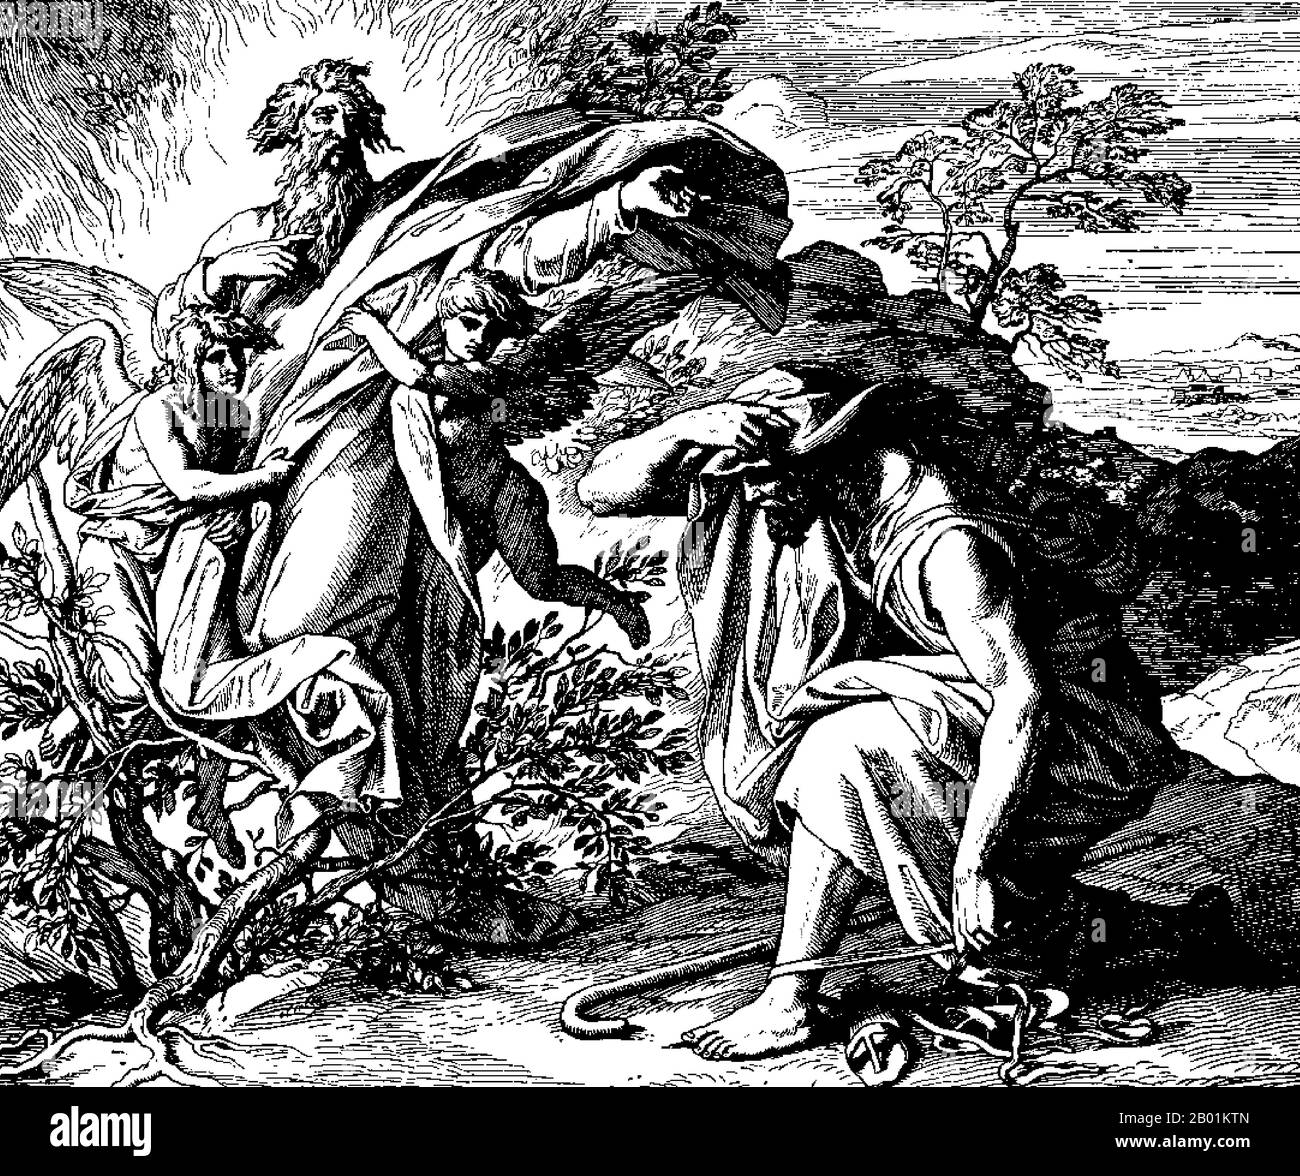 Germany: 'Moses and the Burning Bush'. Woodcut engraving by Julius Schnorr von Carolsfeld (26 March 1794 - 24 May 1872) for 'Die Bibel in Bildern', c. 1851-1860.  The burning bush is an object described by the Book of Exodus (3:1-21) as being located on Mount Sinai; according to the narrative, the bush was on fire, but was not consumed by the flames, hence the name.  In the narrative, the burning bush is the location at which Moses was appointed by God to lead the Israelites out of Egypt and into Canaan. Stock Photo